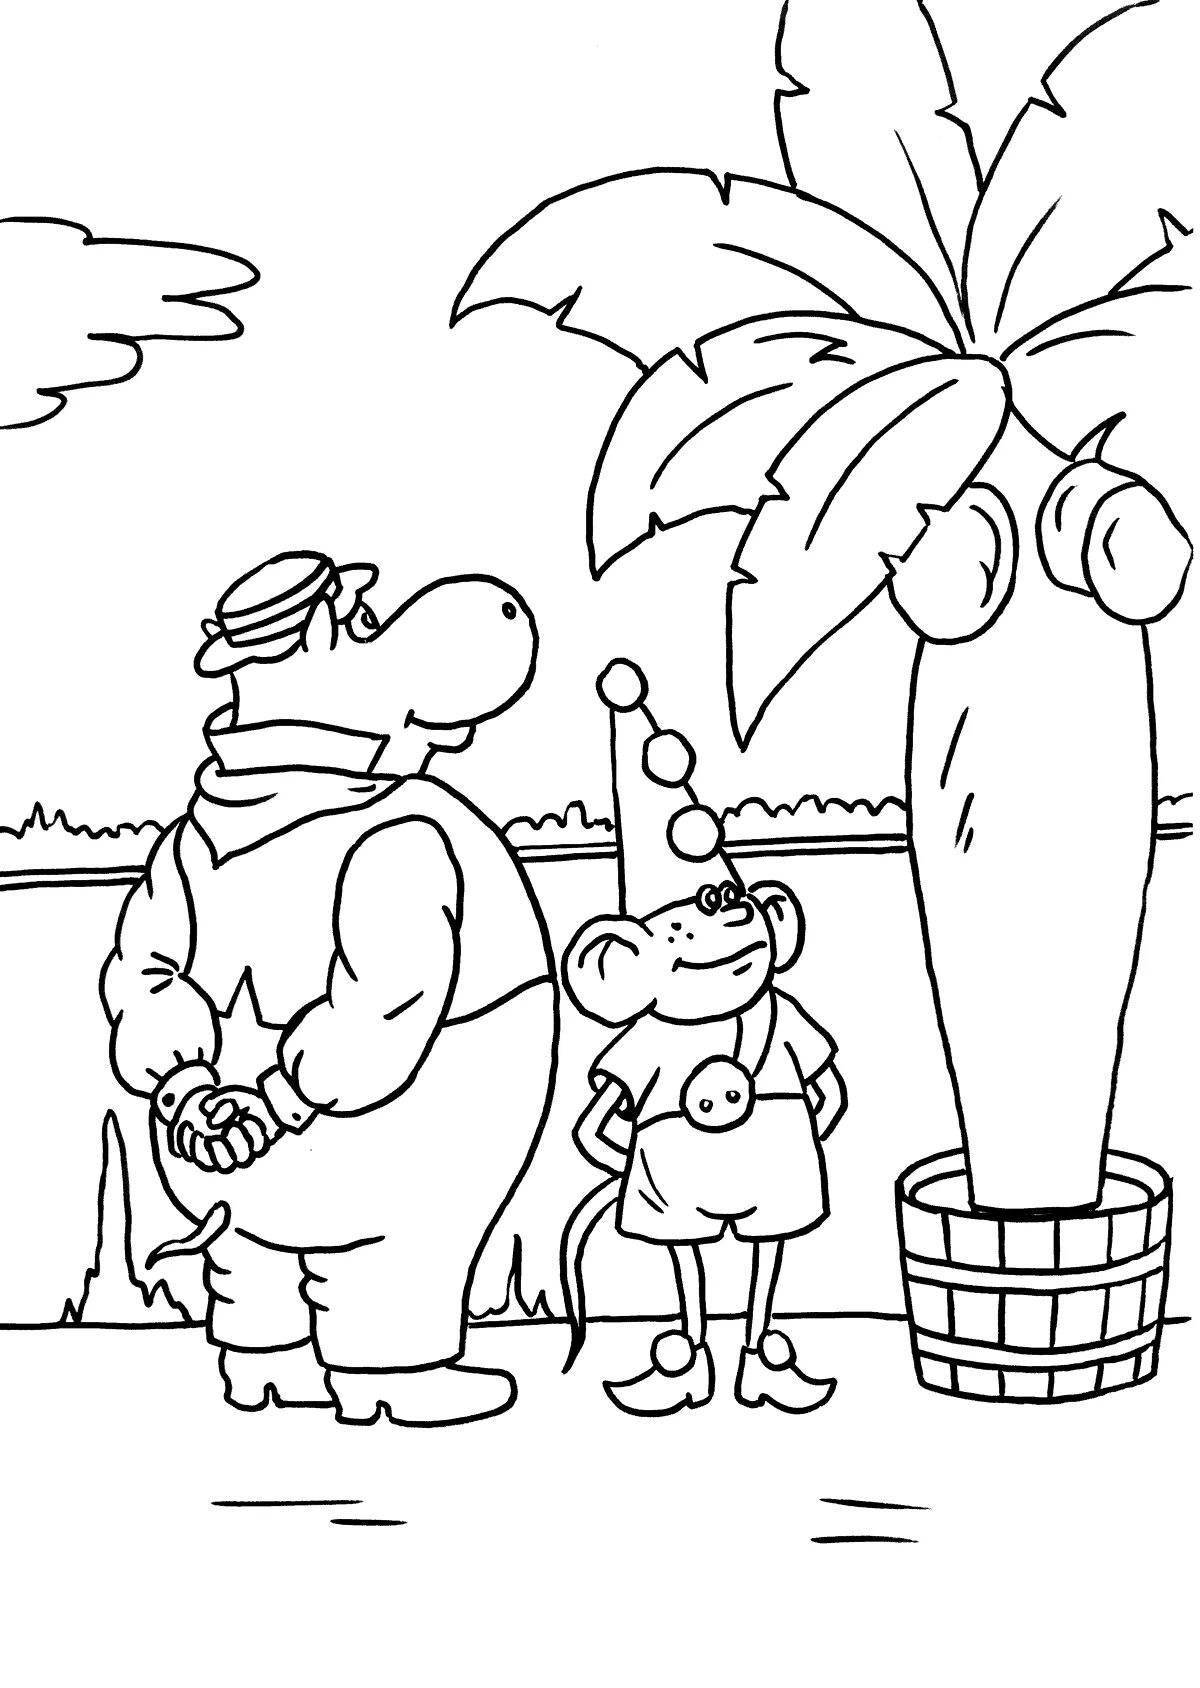 Playful funky uncle mokus coloring page